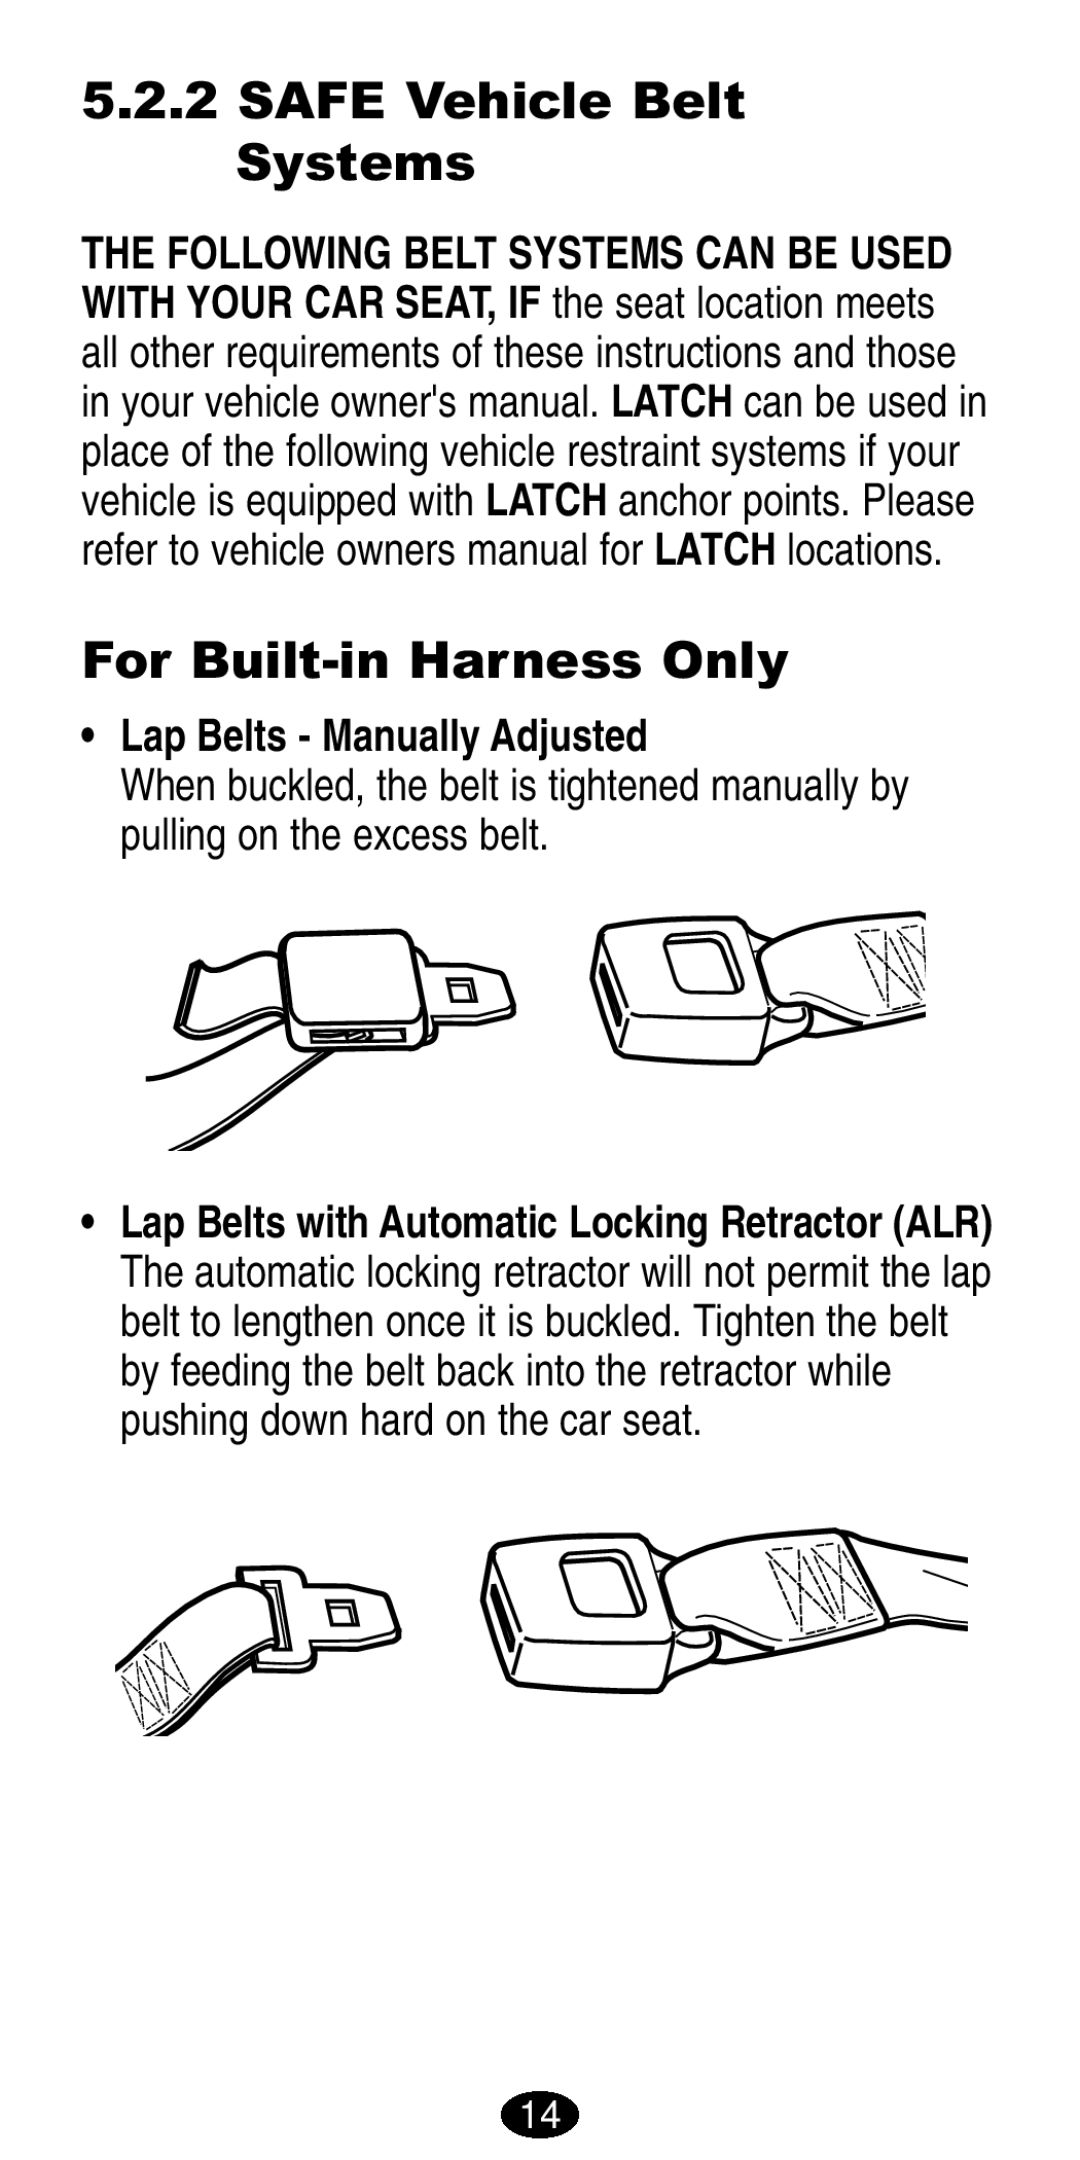 Graco 8490, 8486 manual SAFE Vehicle Belt Systems, For Built-in Harness Only, Lap Belts - Manually Adjusted 